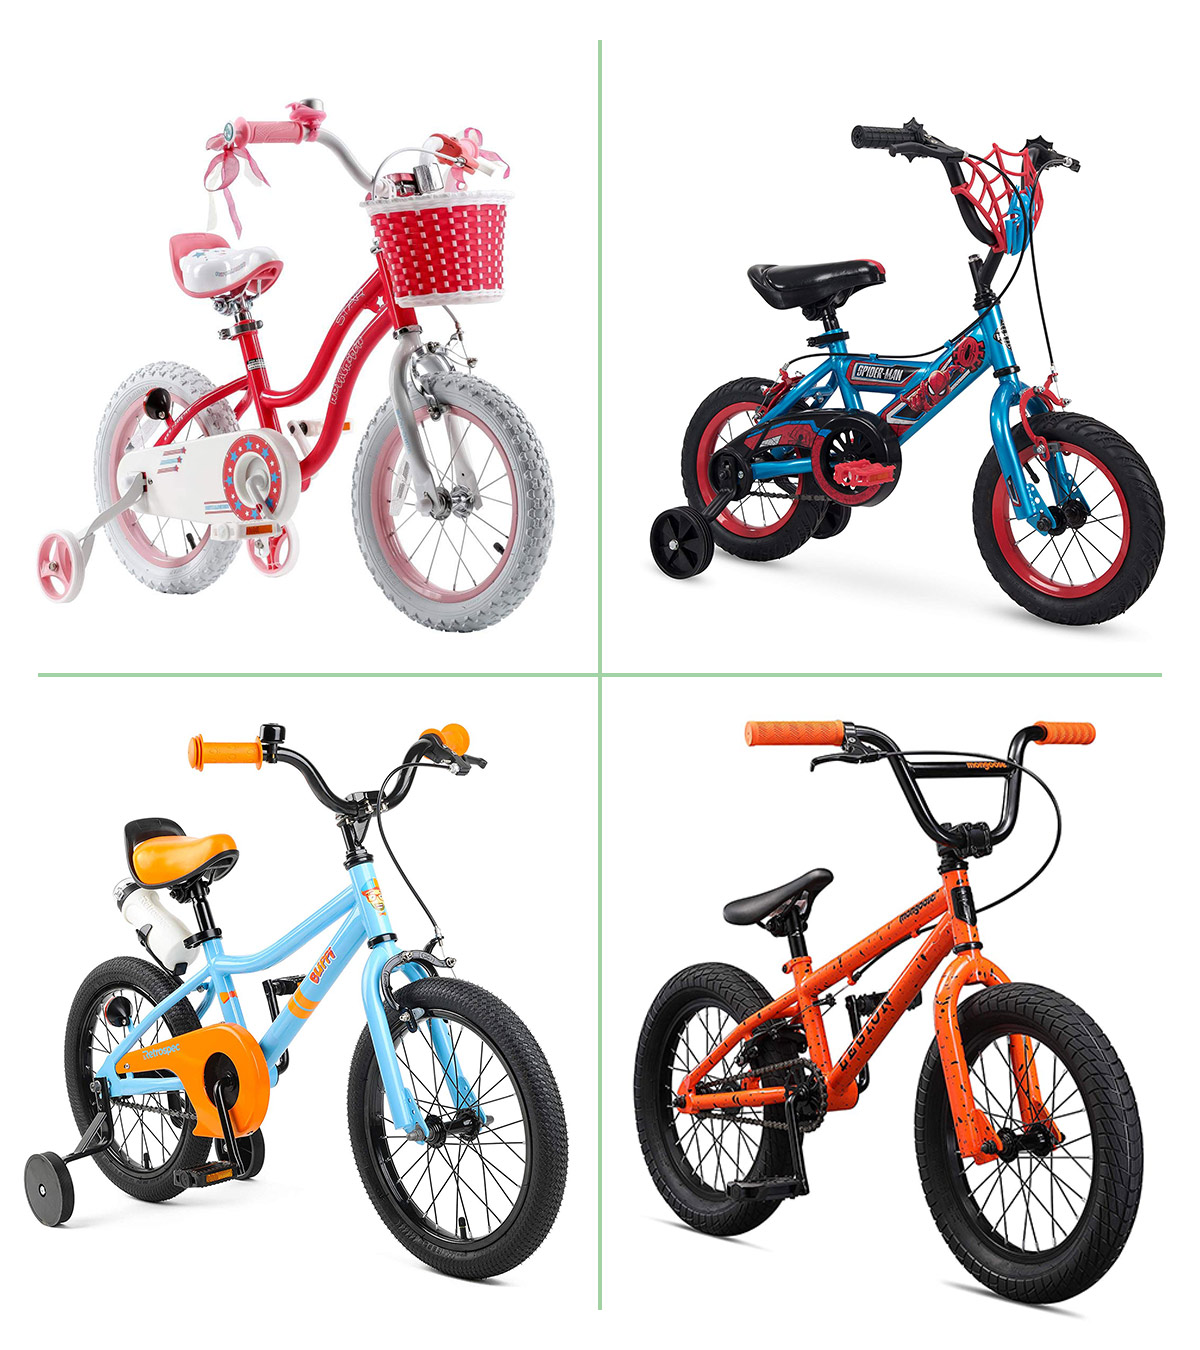 15 Best Bikes To Buy For Kids In 2021